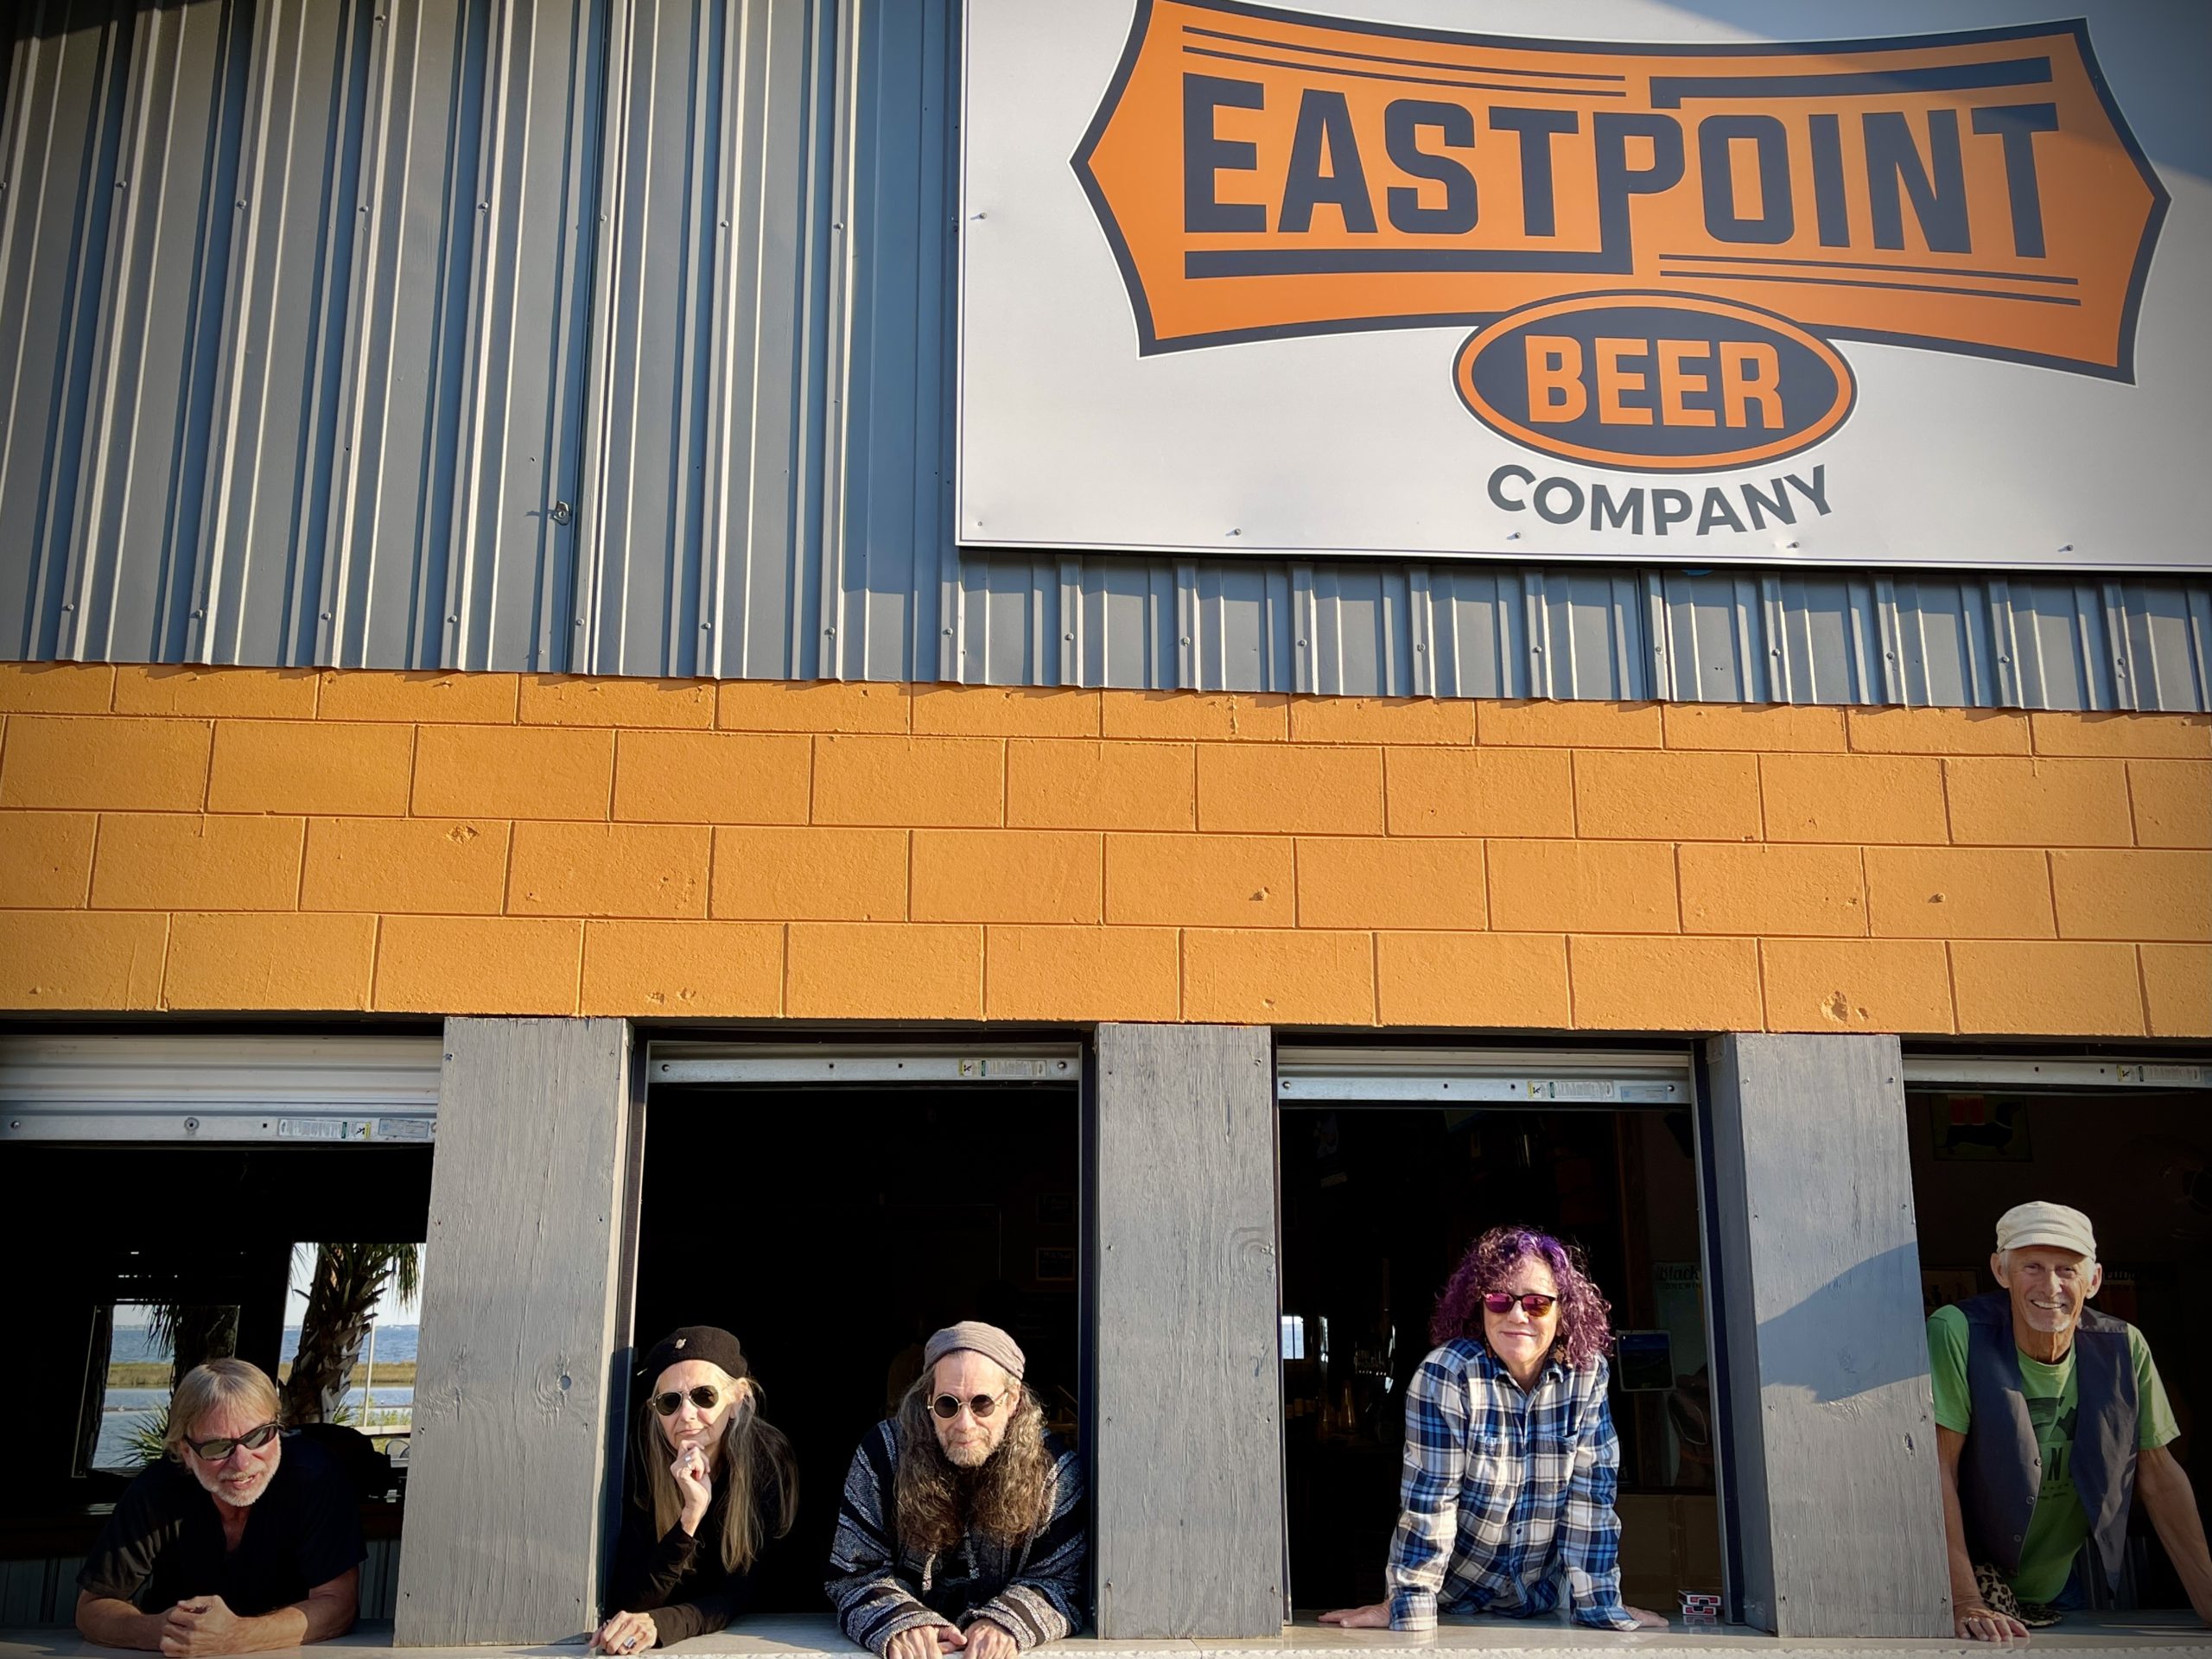 the band Hot Mess hanging out of the windows of a Eastpoint Beer Company